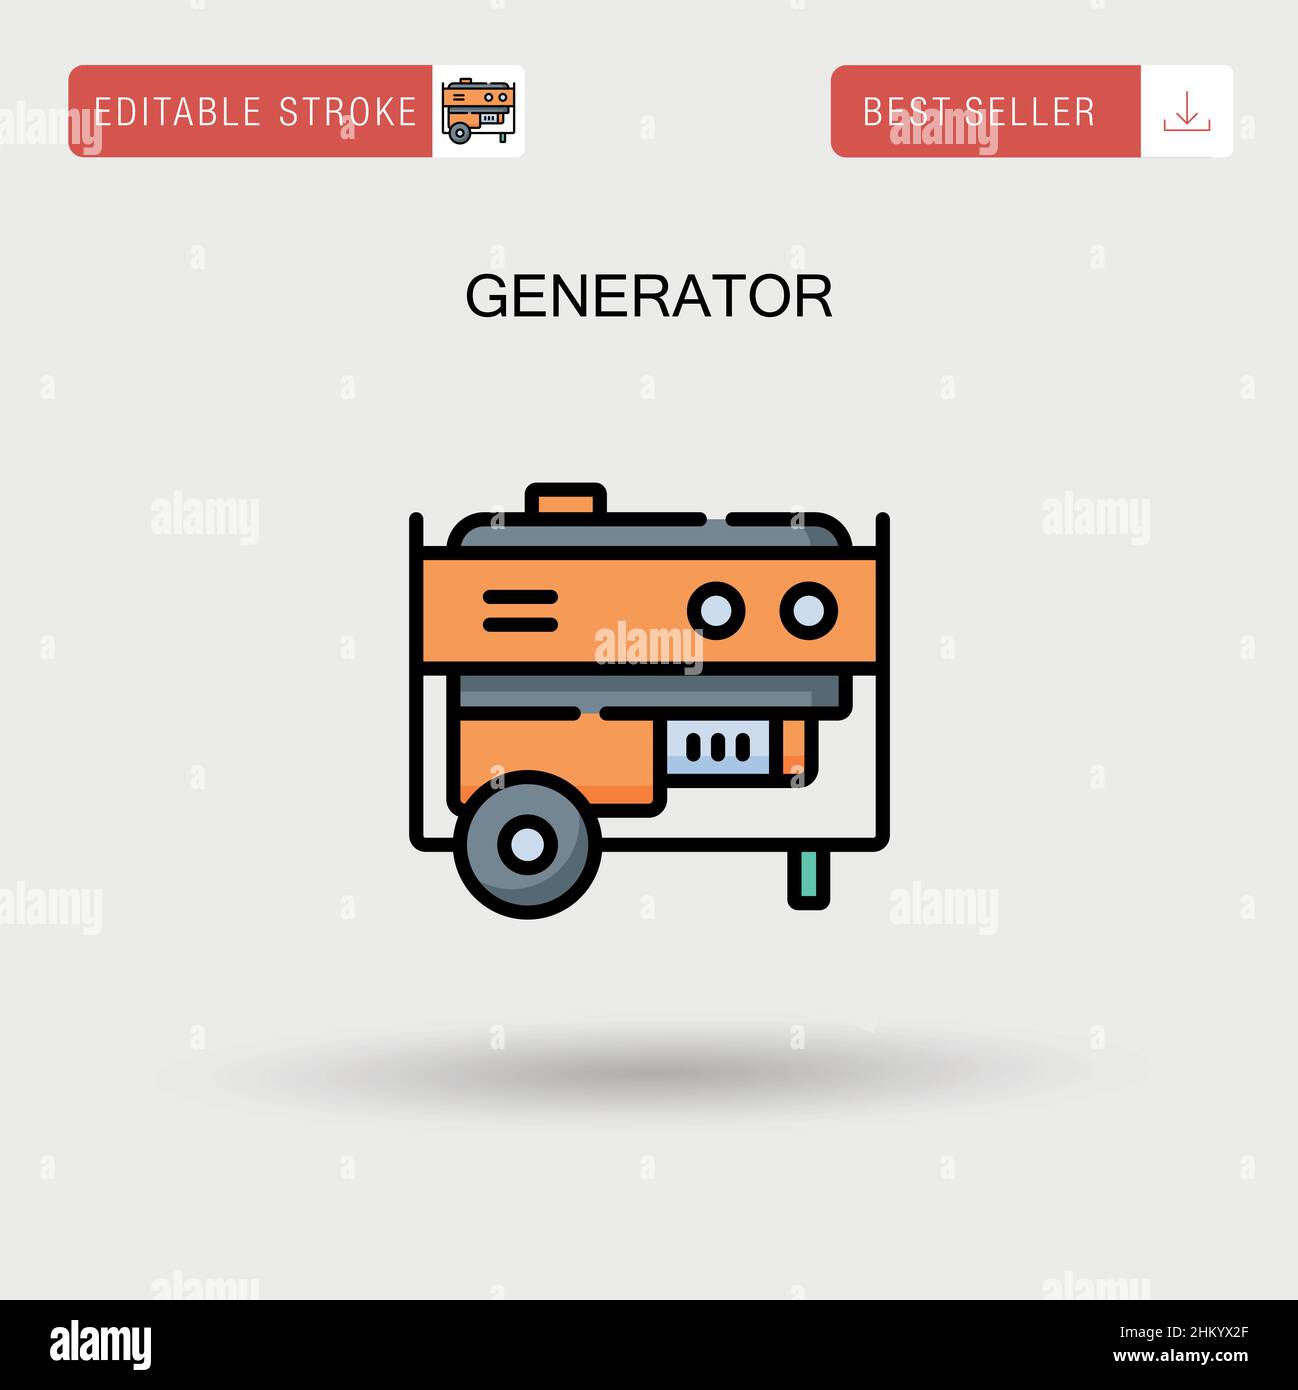 app icon generator by paolo biagini